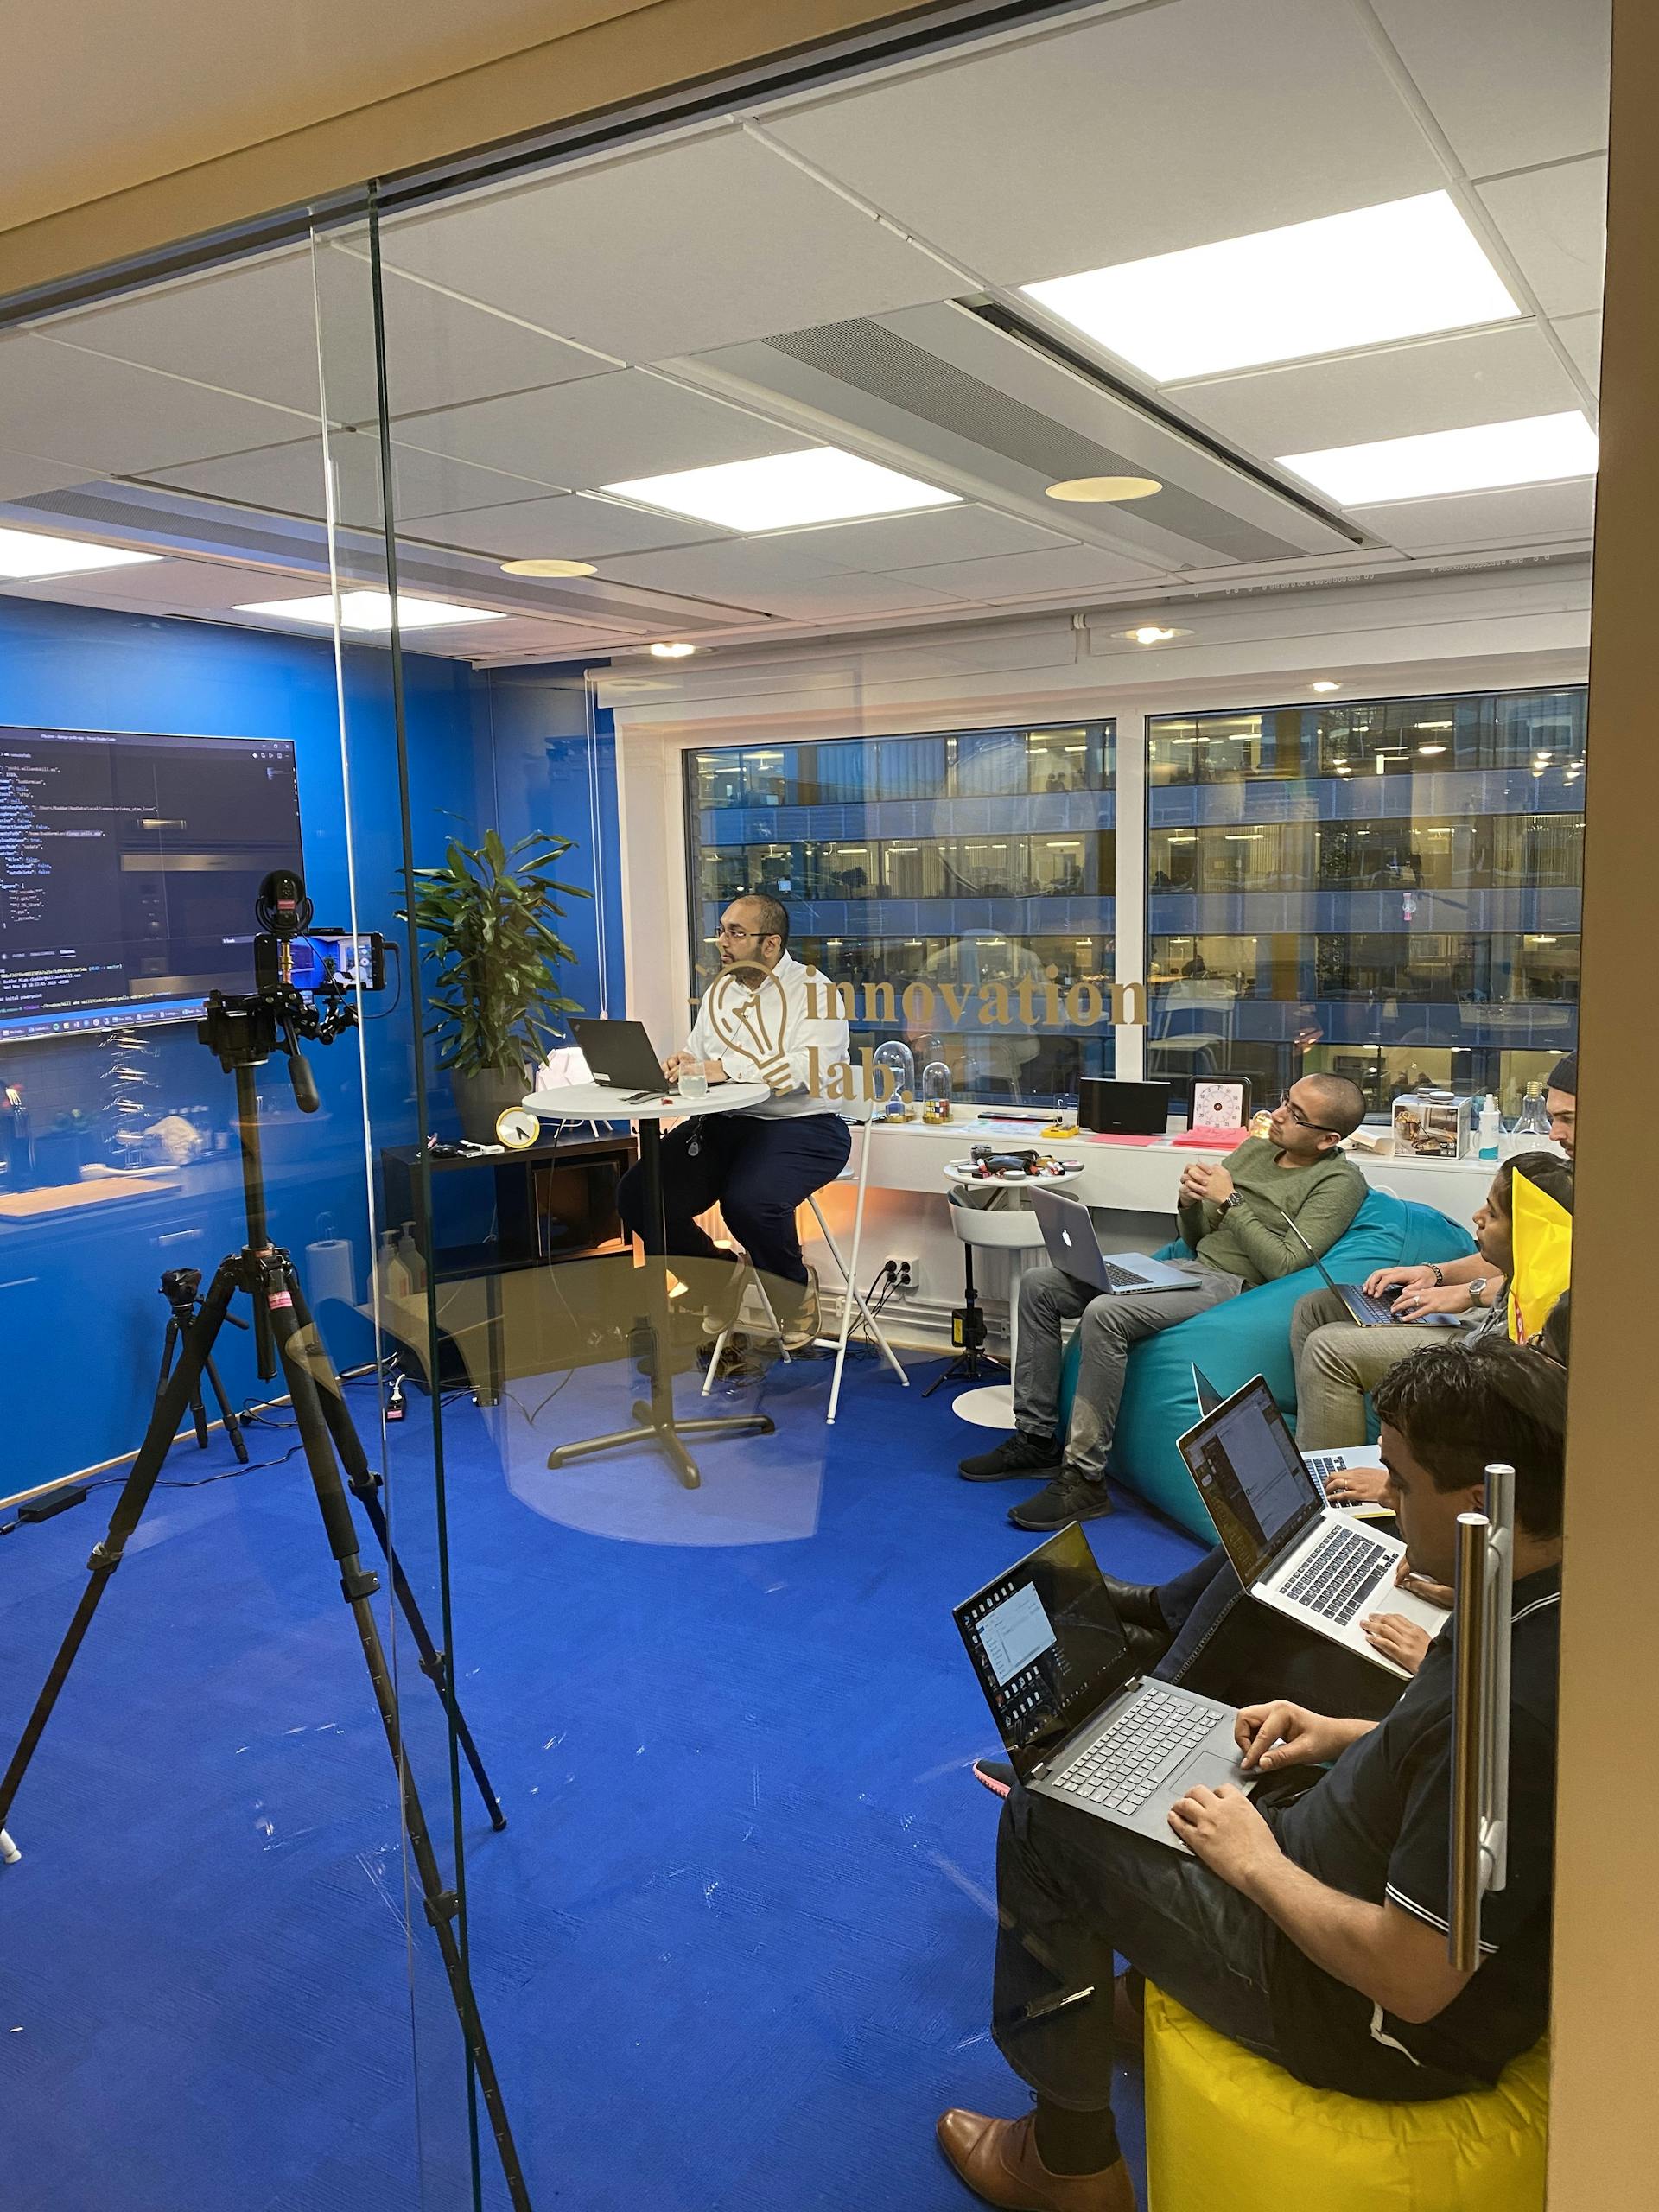 People sitting in a blue office room with bean bags, watching a presentation